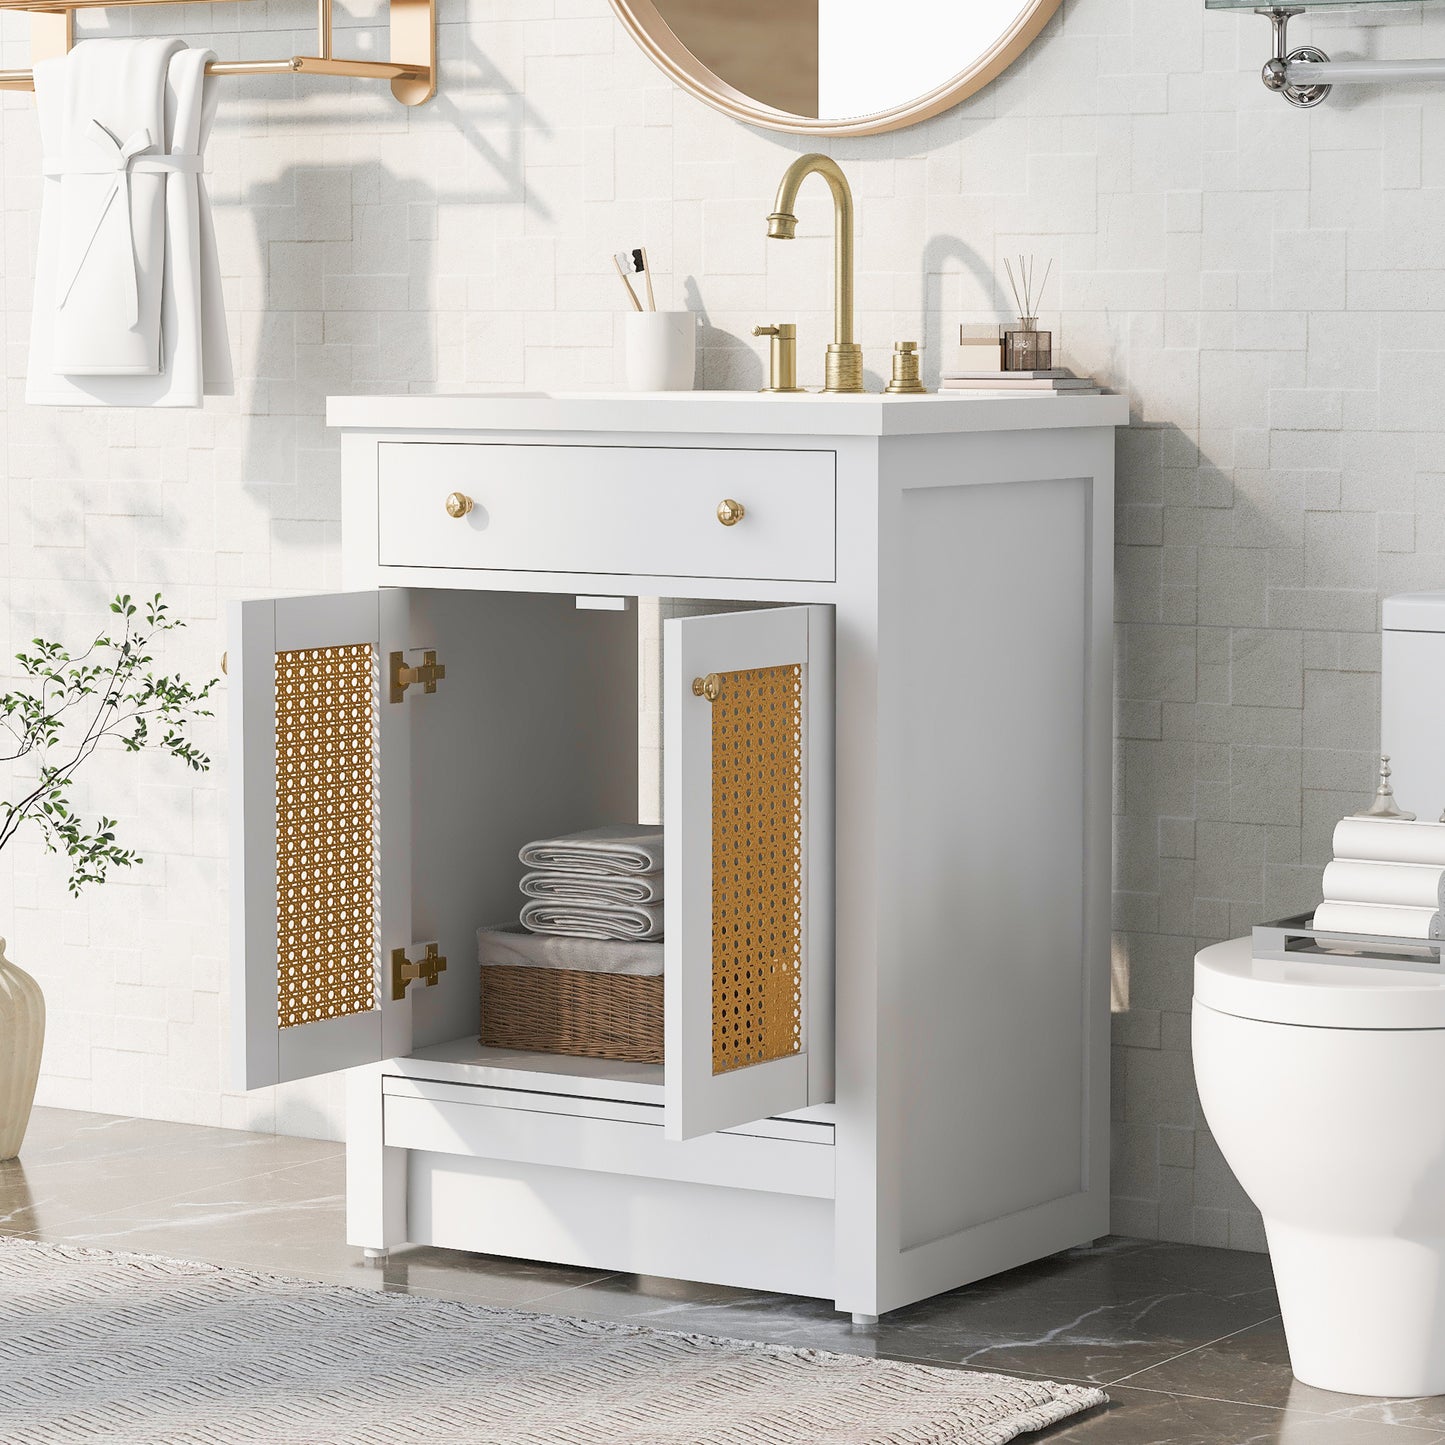 24" Bathroom vanity with Single Sink; White Combo Cabinet Undermount Sink; Bathroom Storage Cabinet; Solid Wood Frame; Pull-out footrest